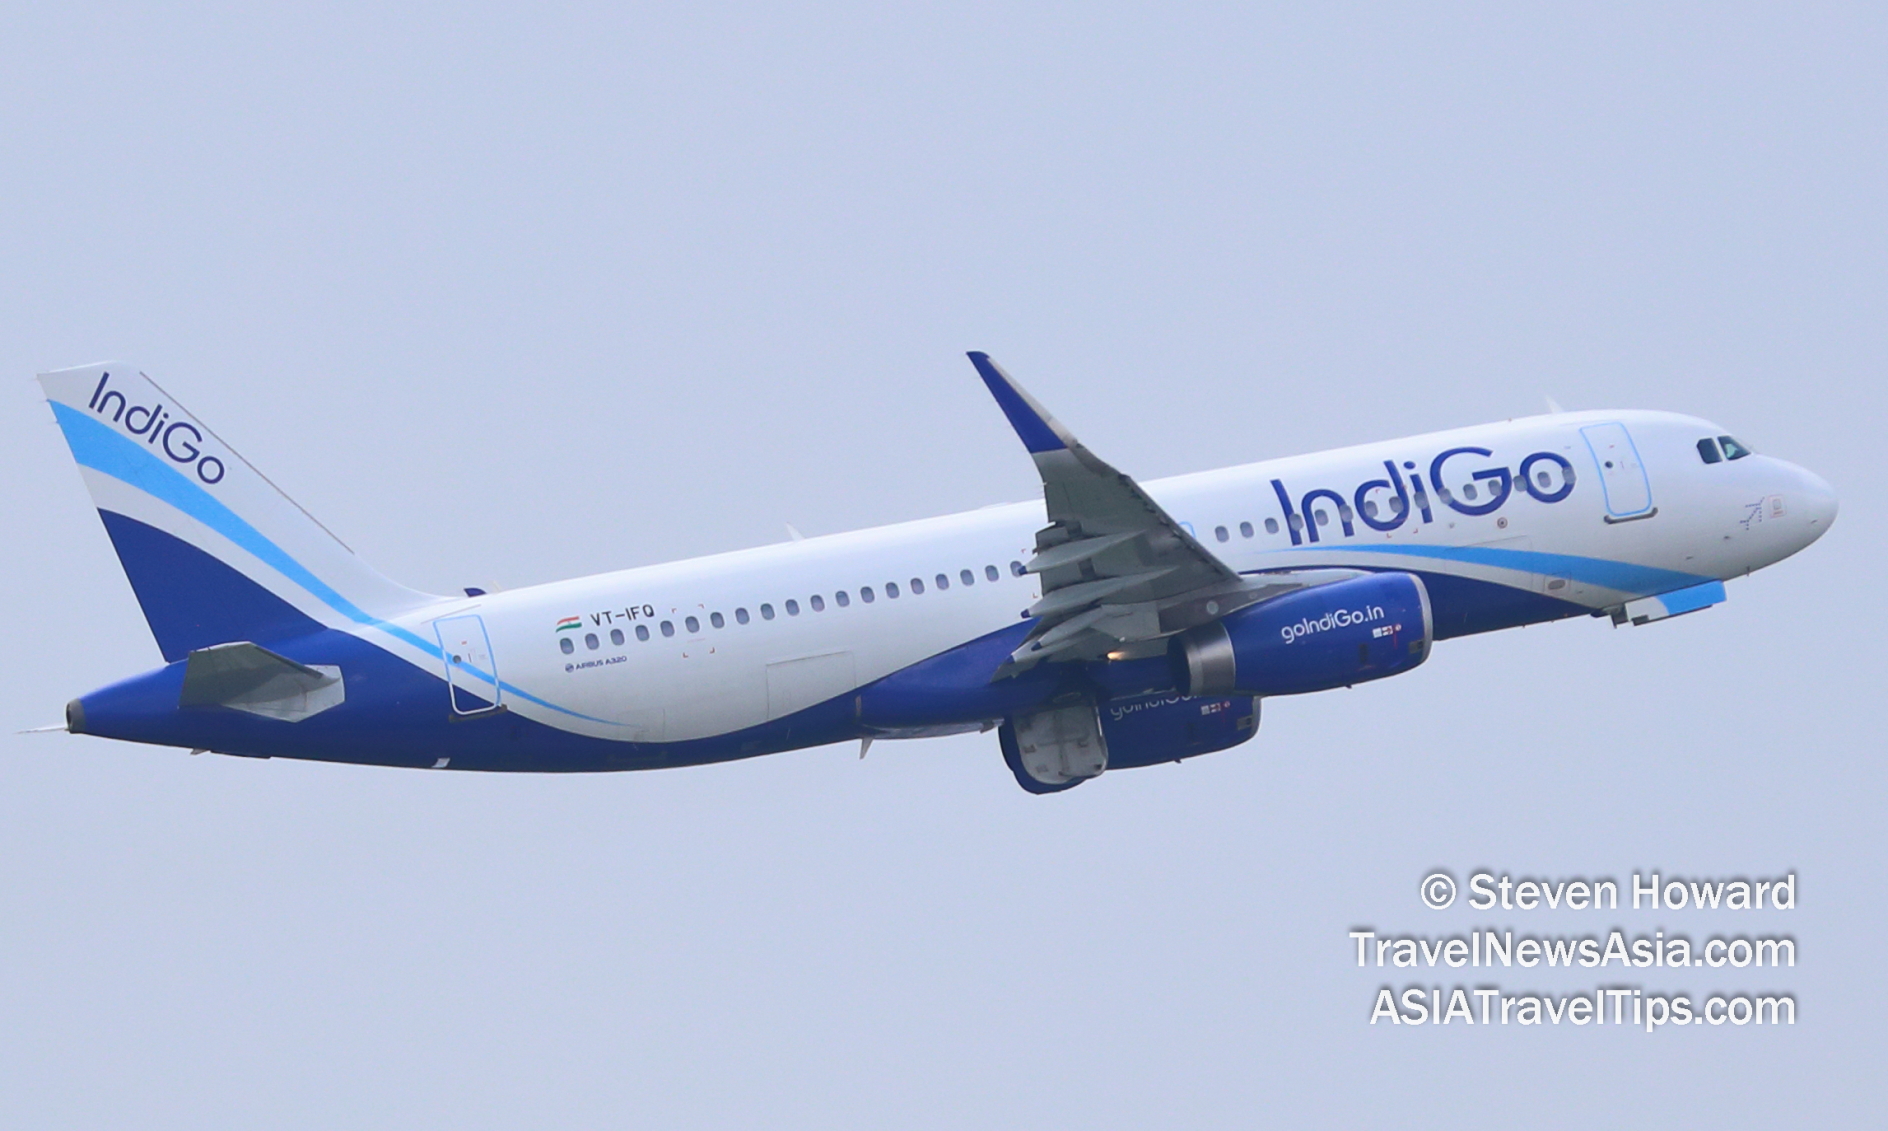 IndiGo Airbus A320 reg: VT-IFQ. Picture by Steven Howard of TravelNewsAsia.com Click to enlarge.